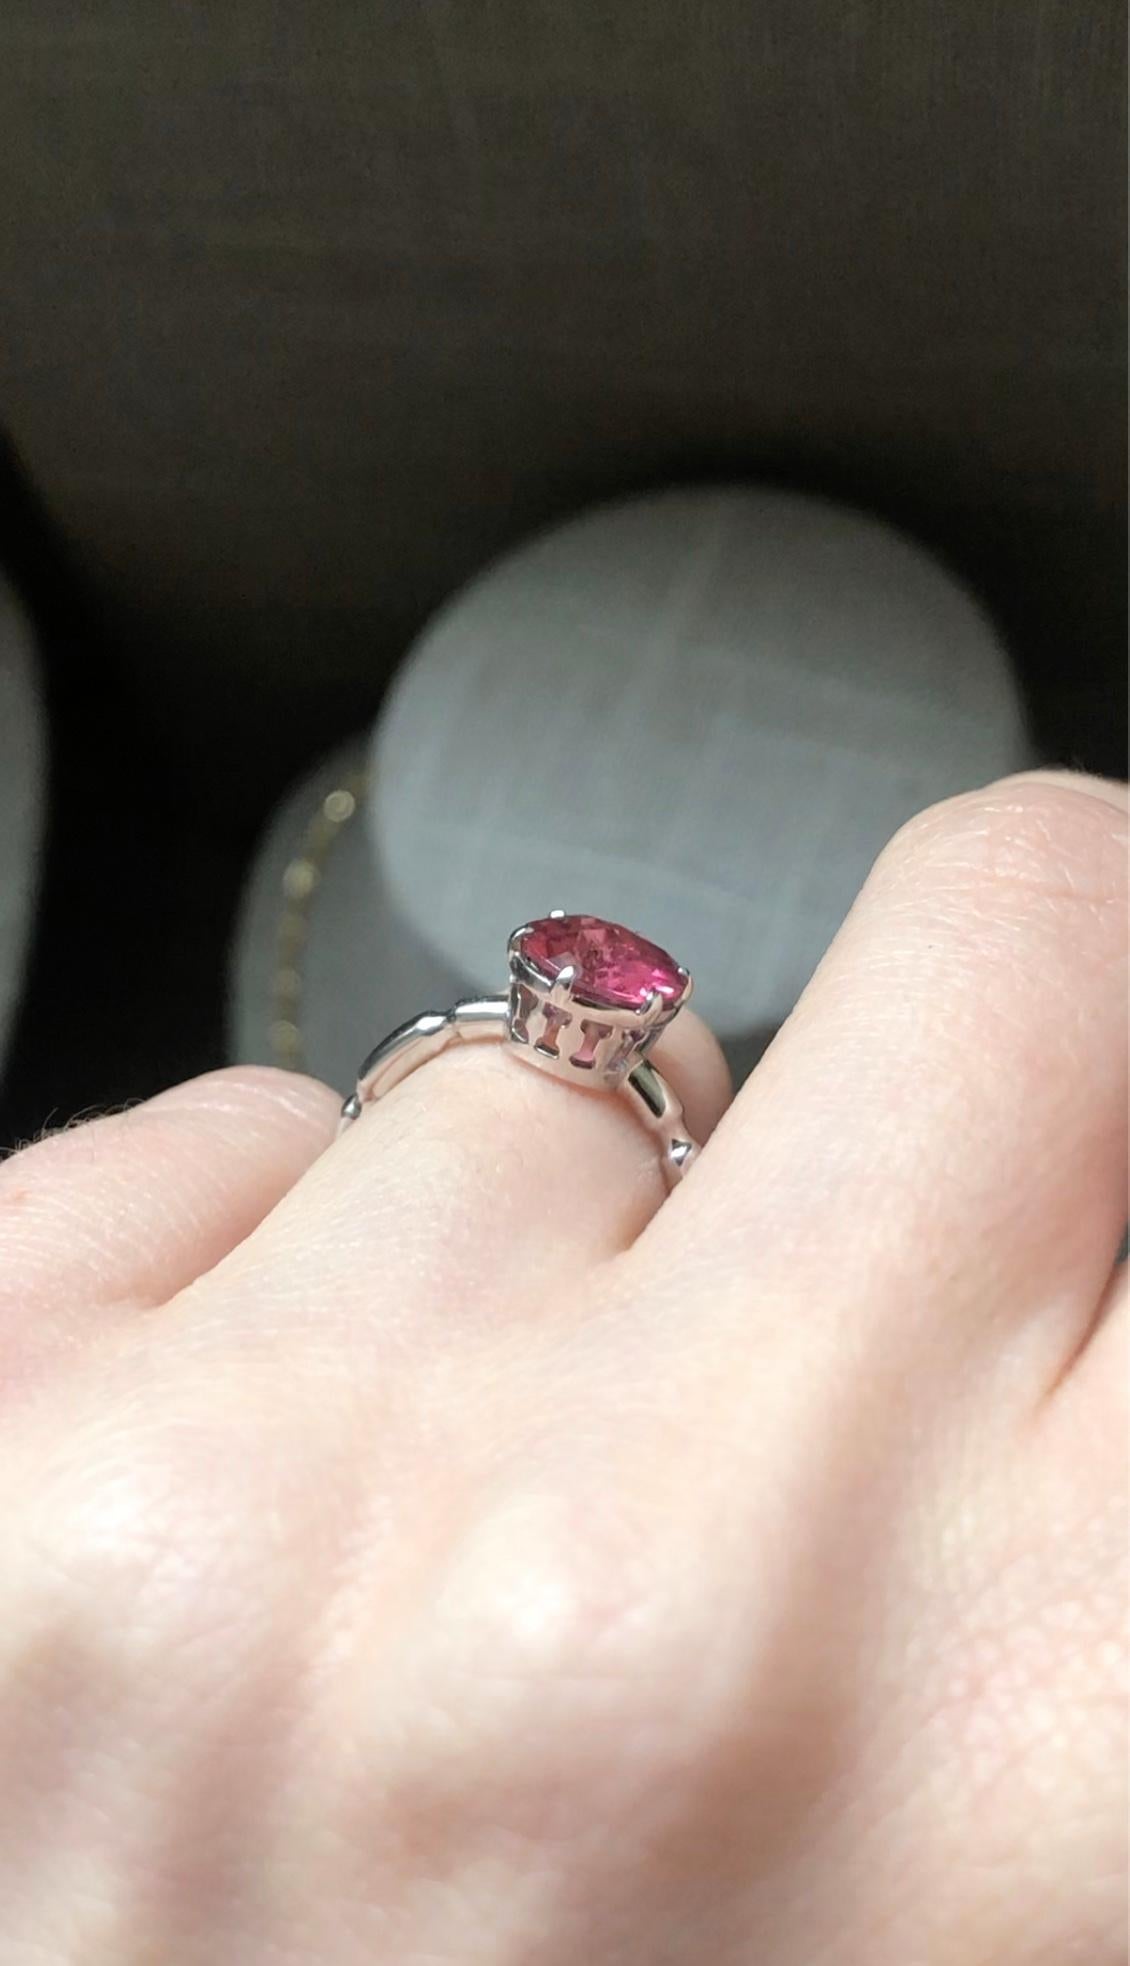 For Sale:  14k White Gold Solitaire Engagement Ring with 1.80 Carat Round Pink Tourmaline 6